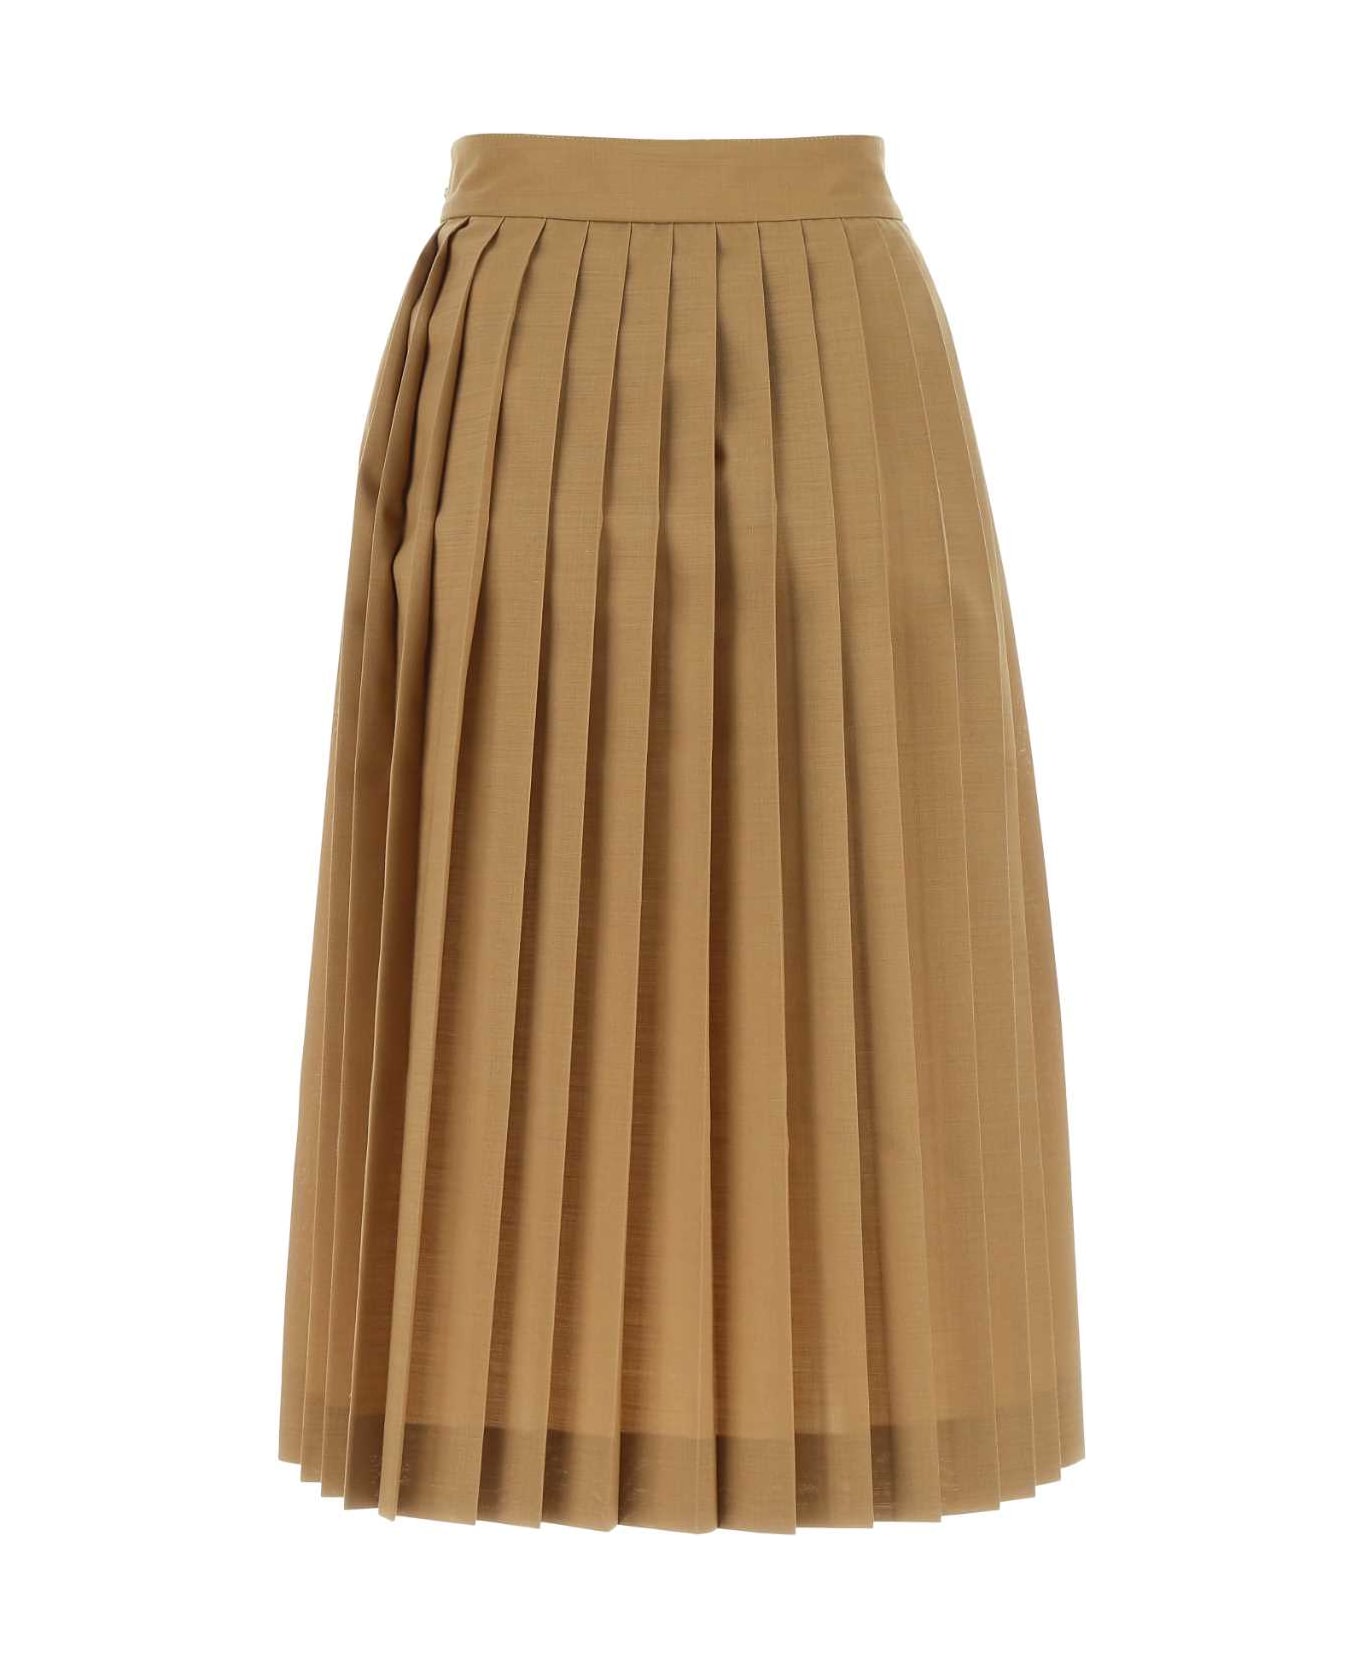 Quira Biscuit Polyester Blend Skirt - Q0024